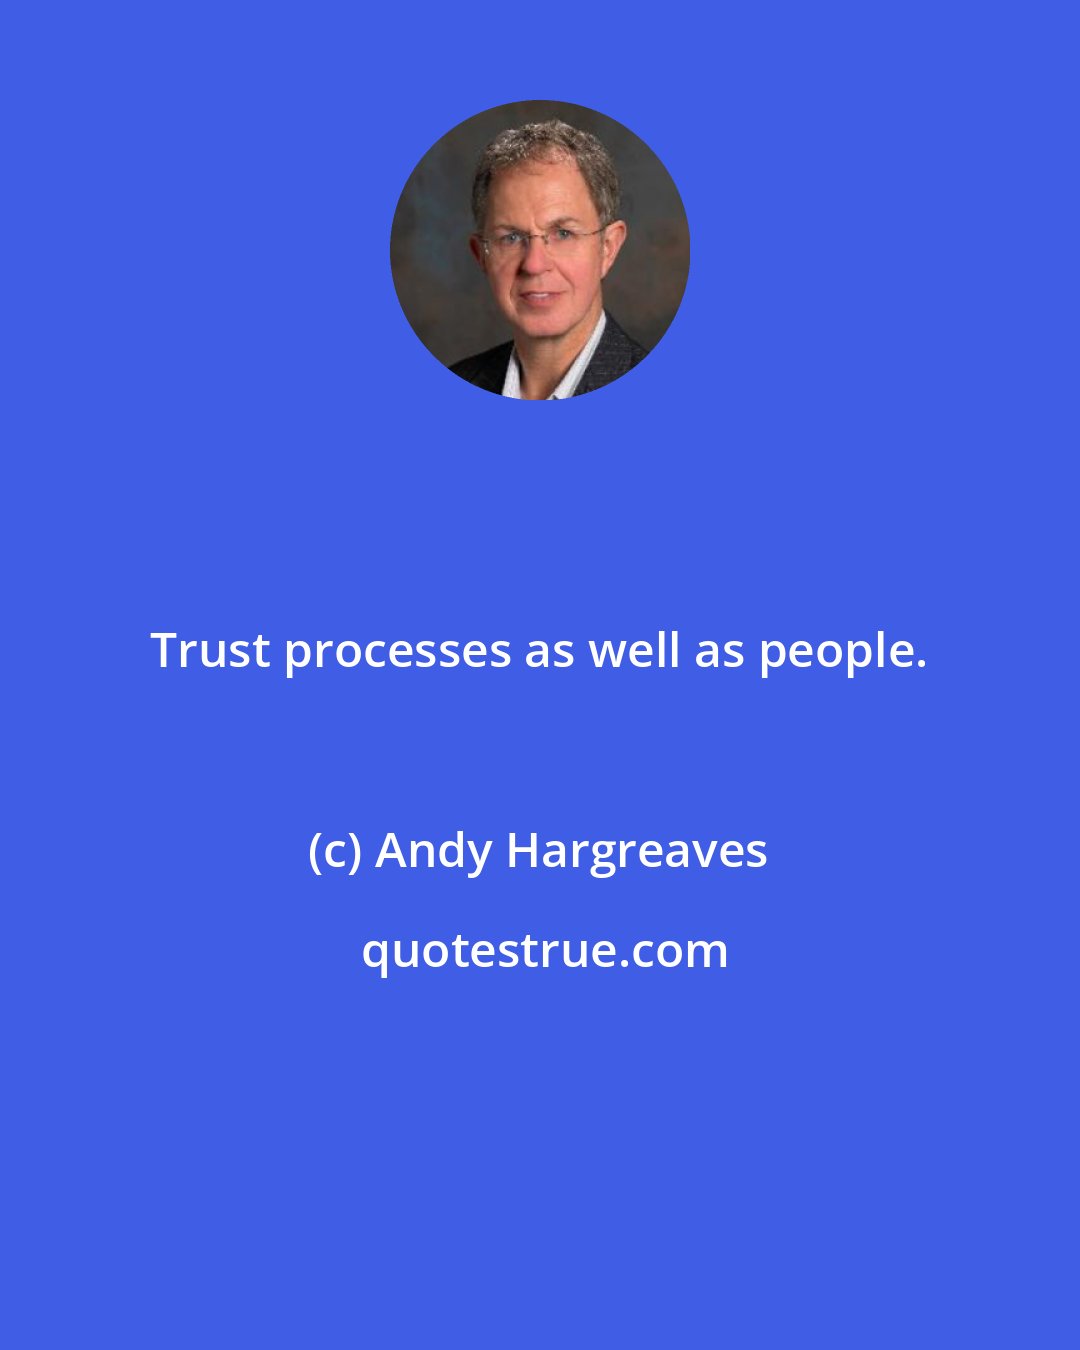 Andy Hargreaves: Trust processes as well as people.